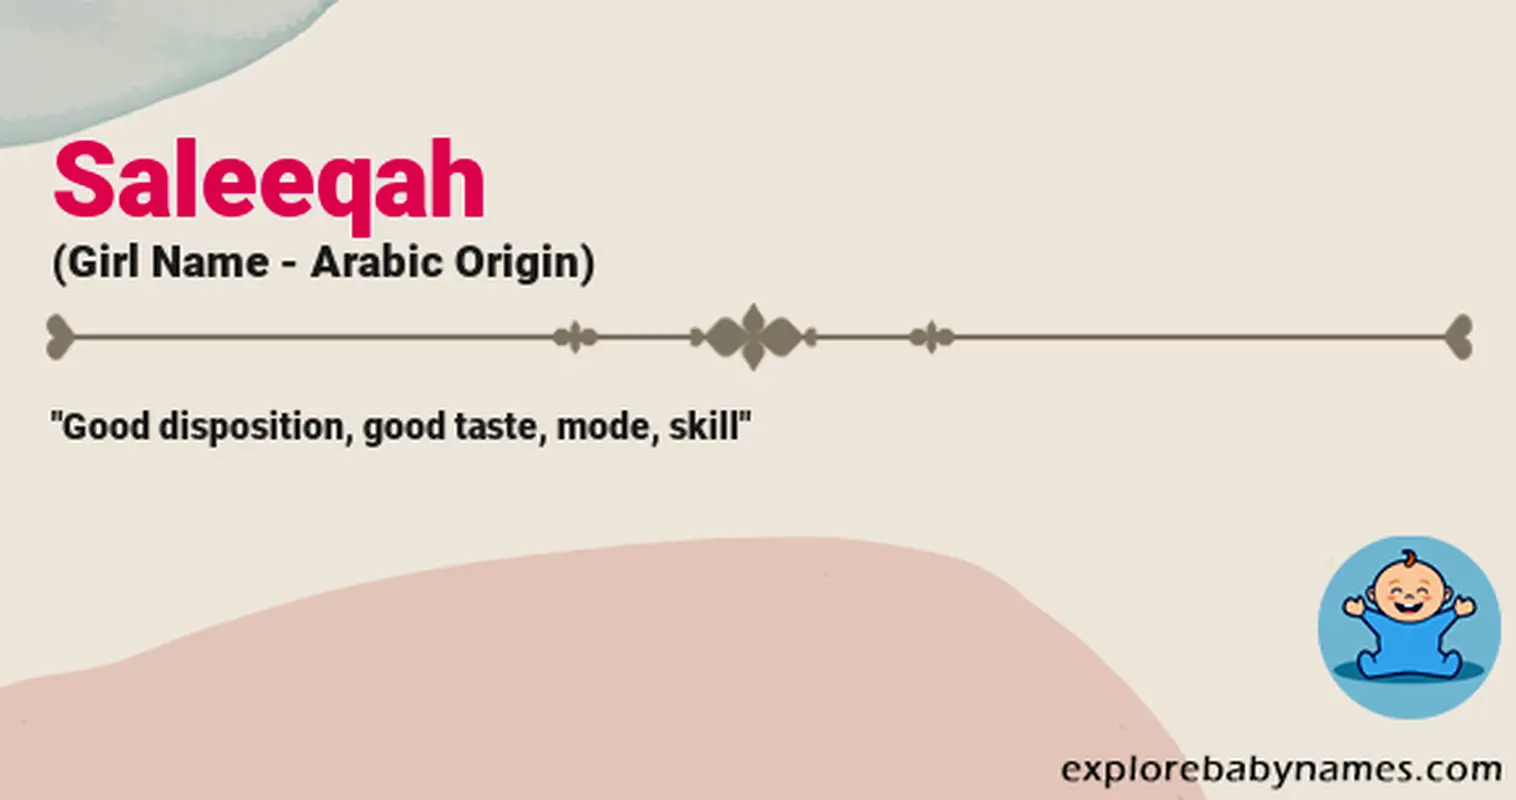 Meaning of Saleeqah